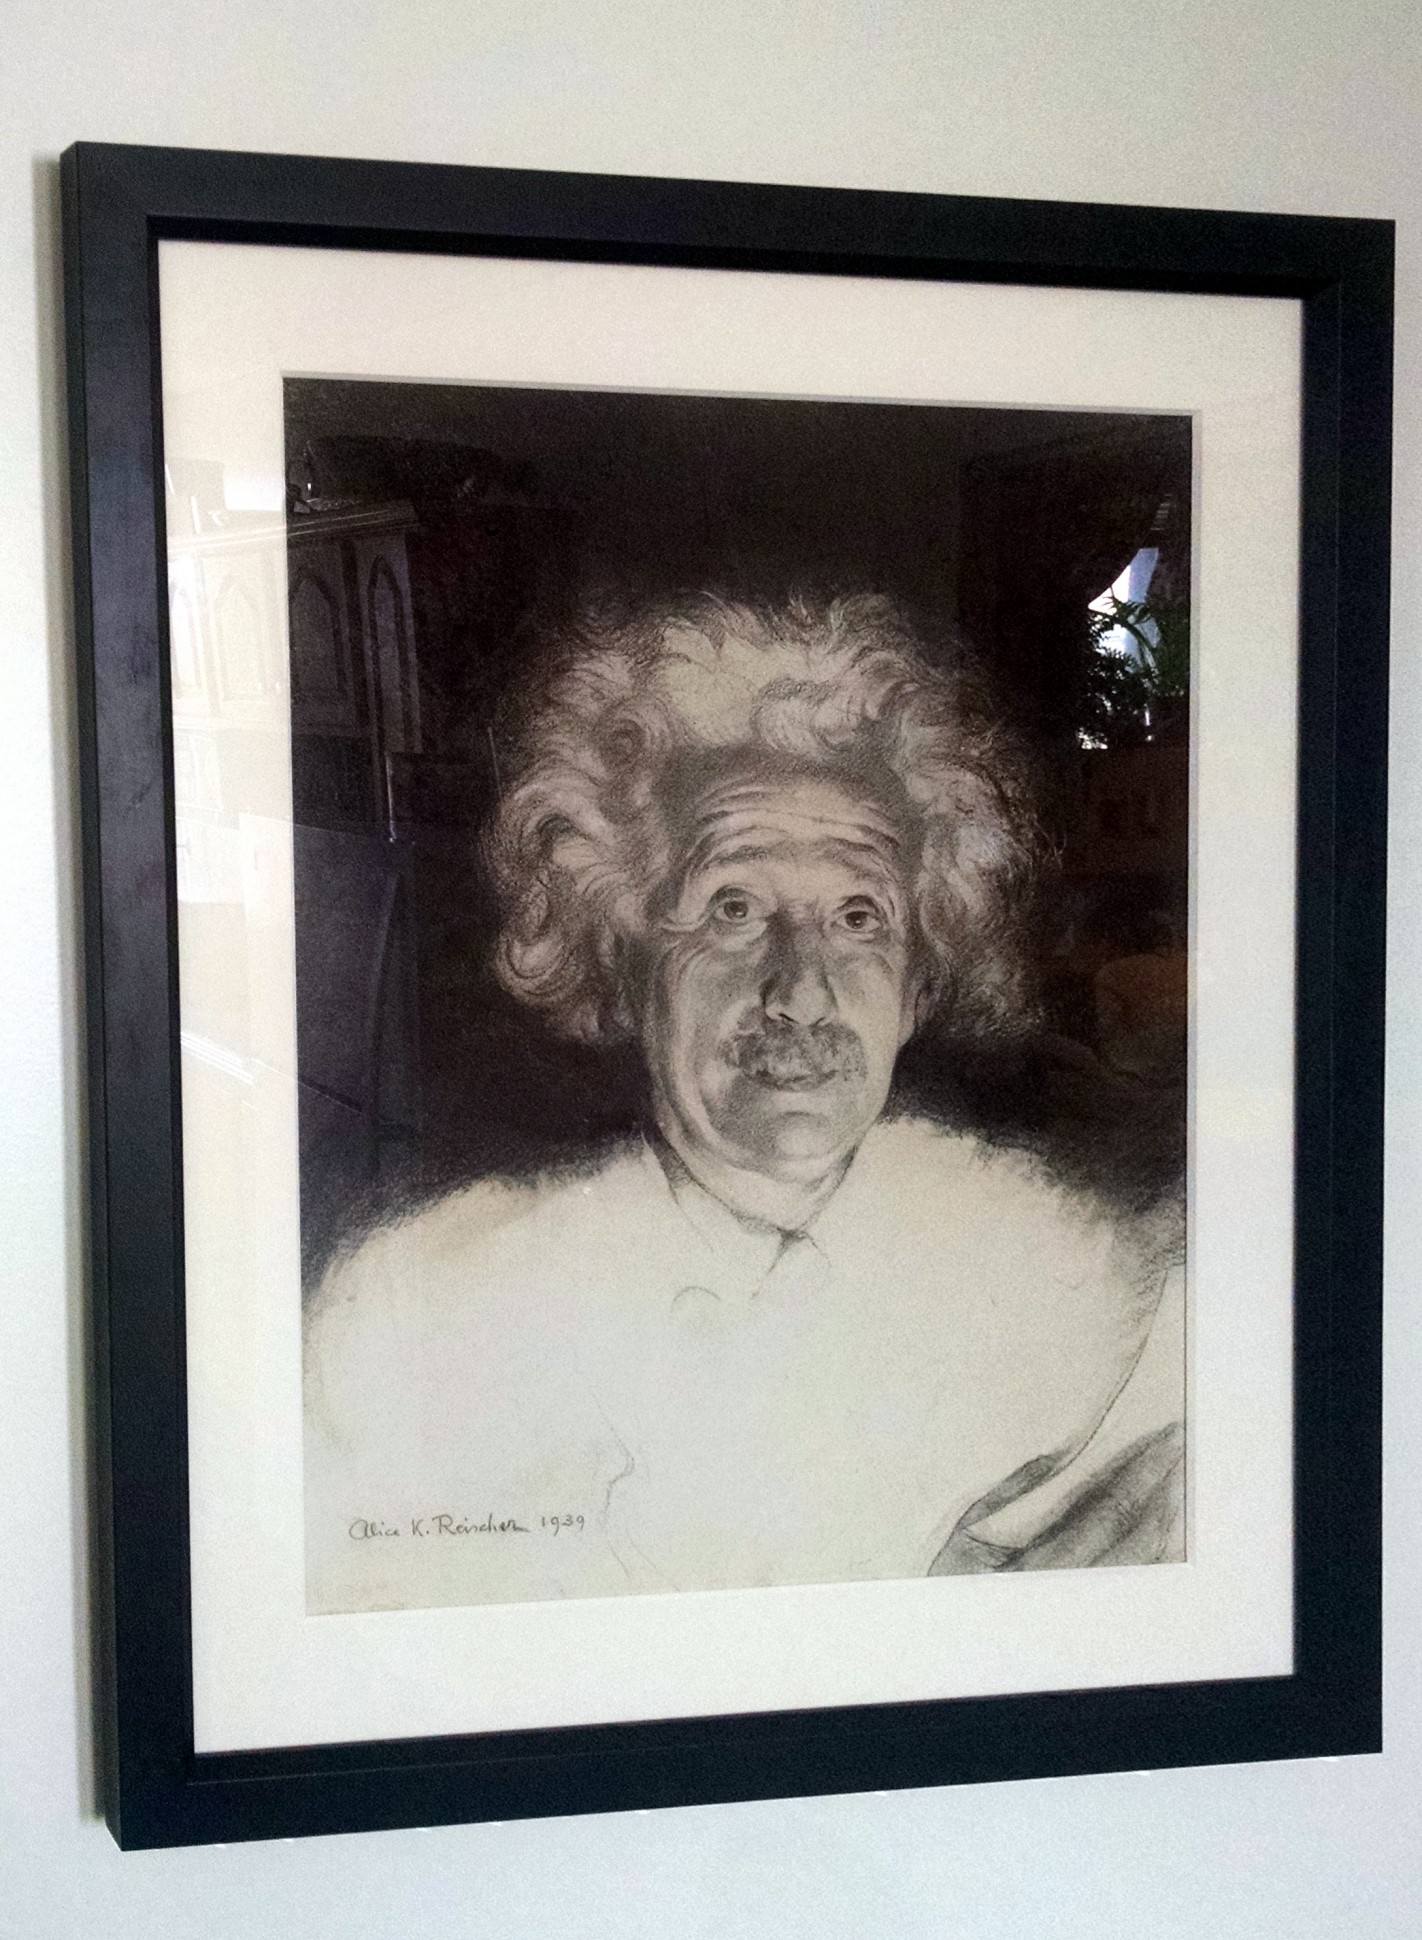 Portrait of Einstein by Alice Reischer, based on a sketch  made during a 1939 lecture. Hangs in the Department of Physics and Astronomy at Union College, a gift of Carl George. (Photo by Chad Orzel)